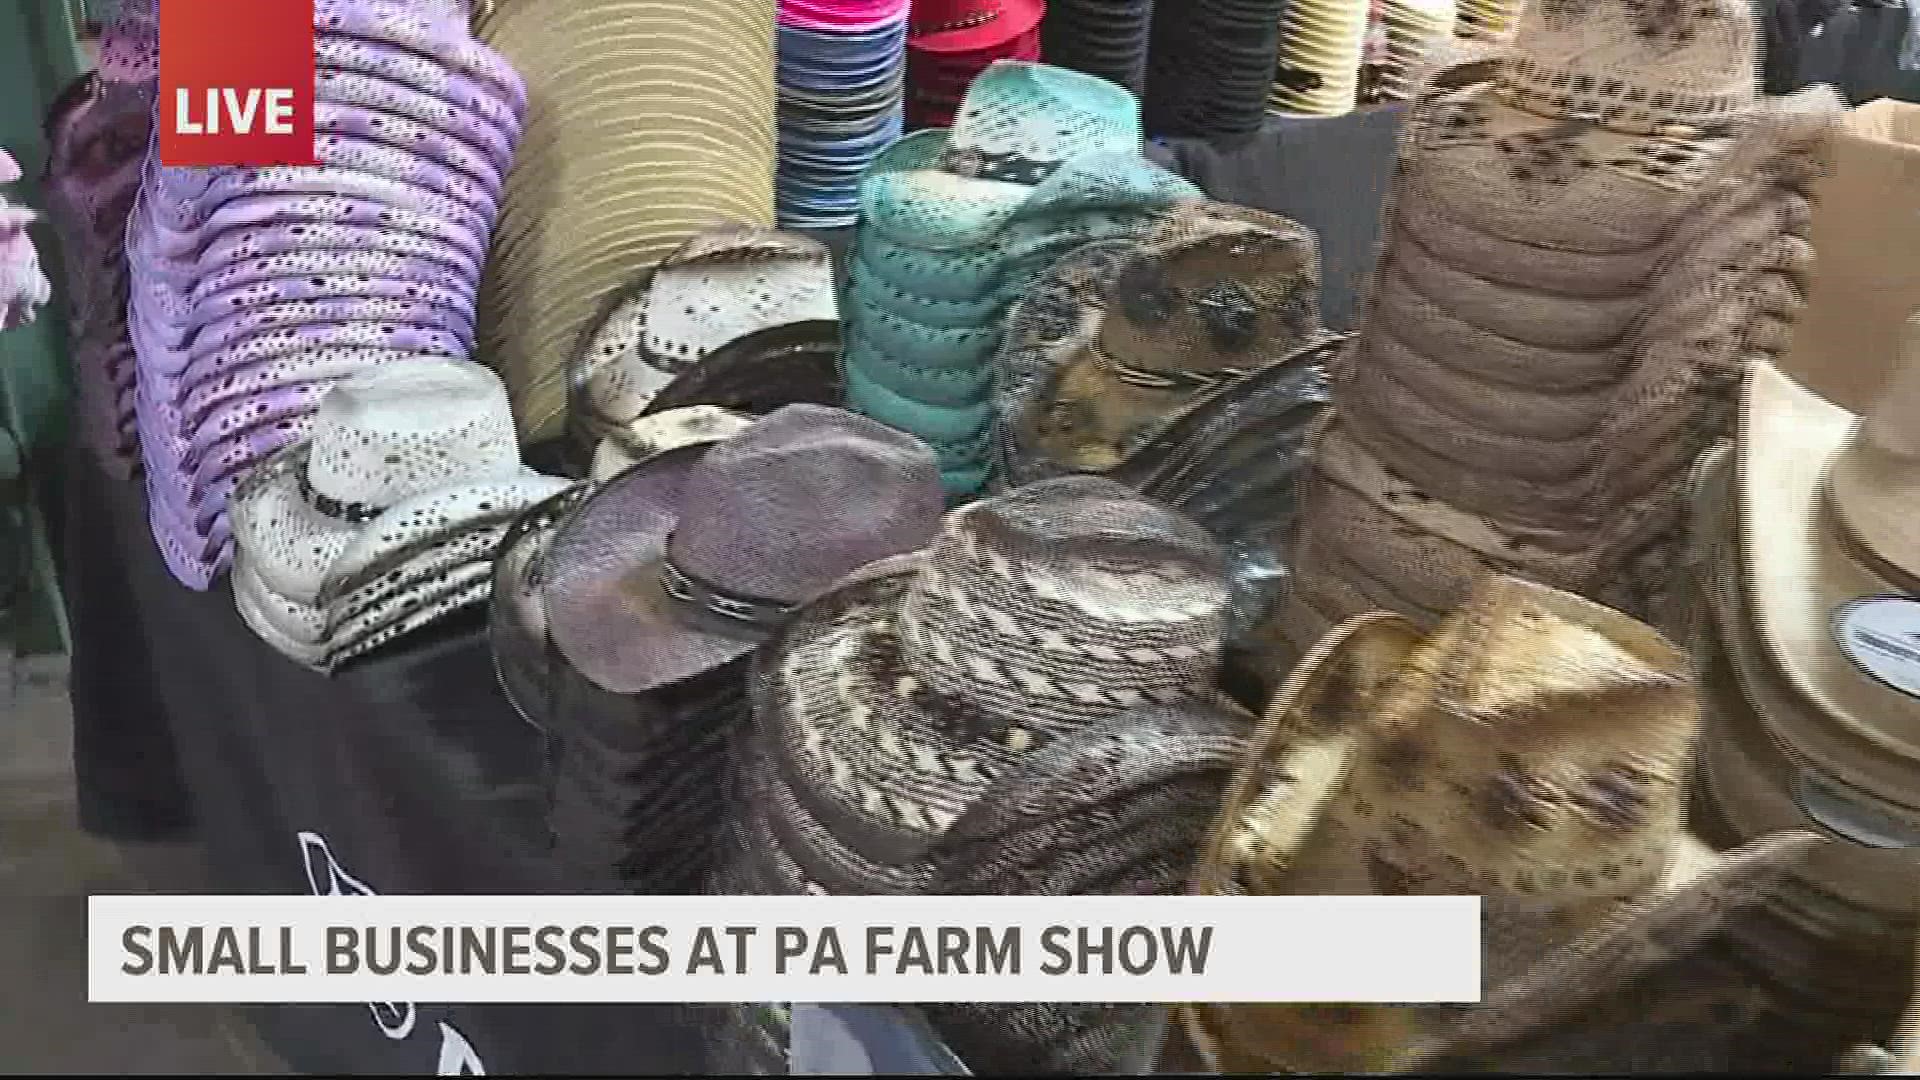 Todd Altmeyer, owner of Altmeyer's Western Wear, talks about his experience vending at the Pennsylvania Farm Show.